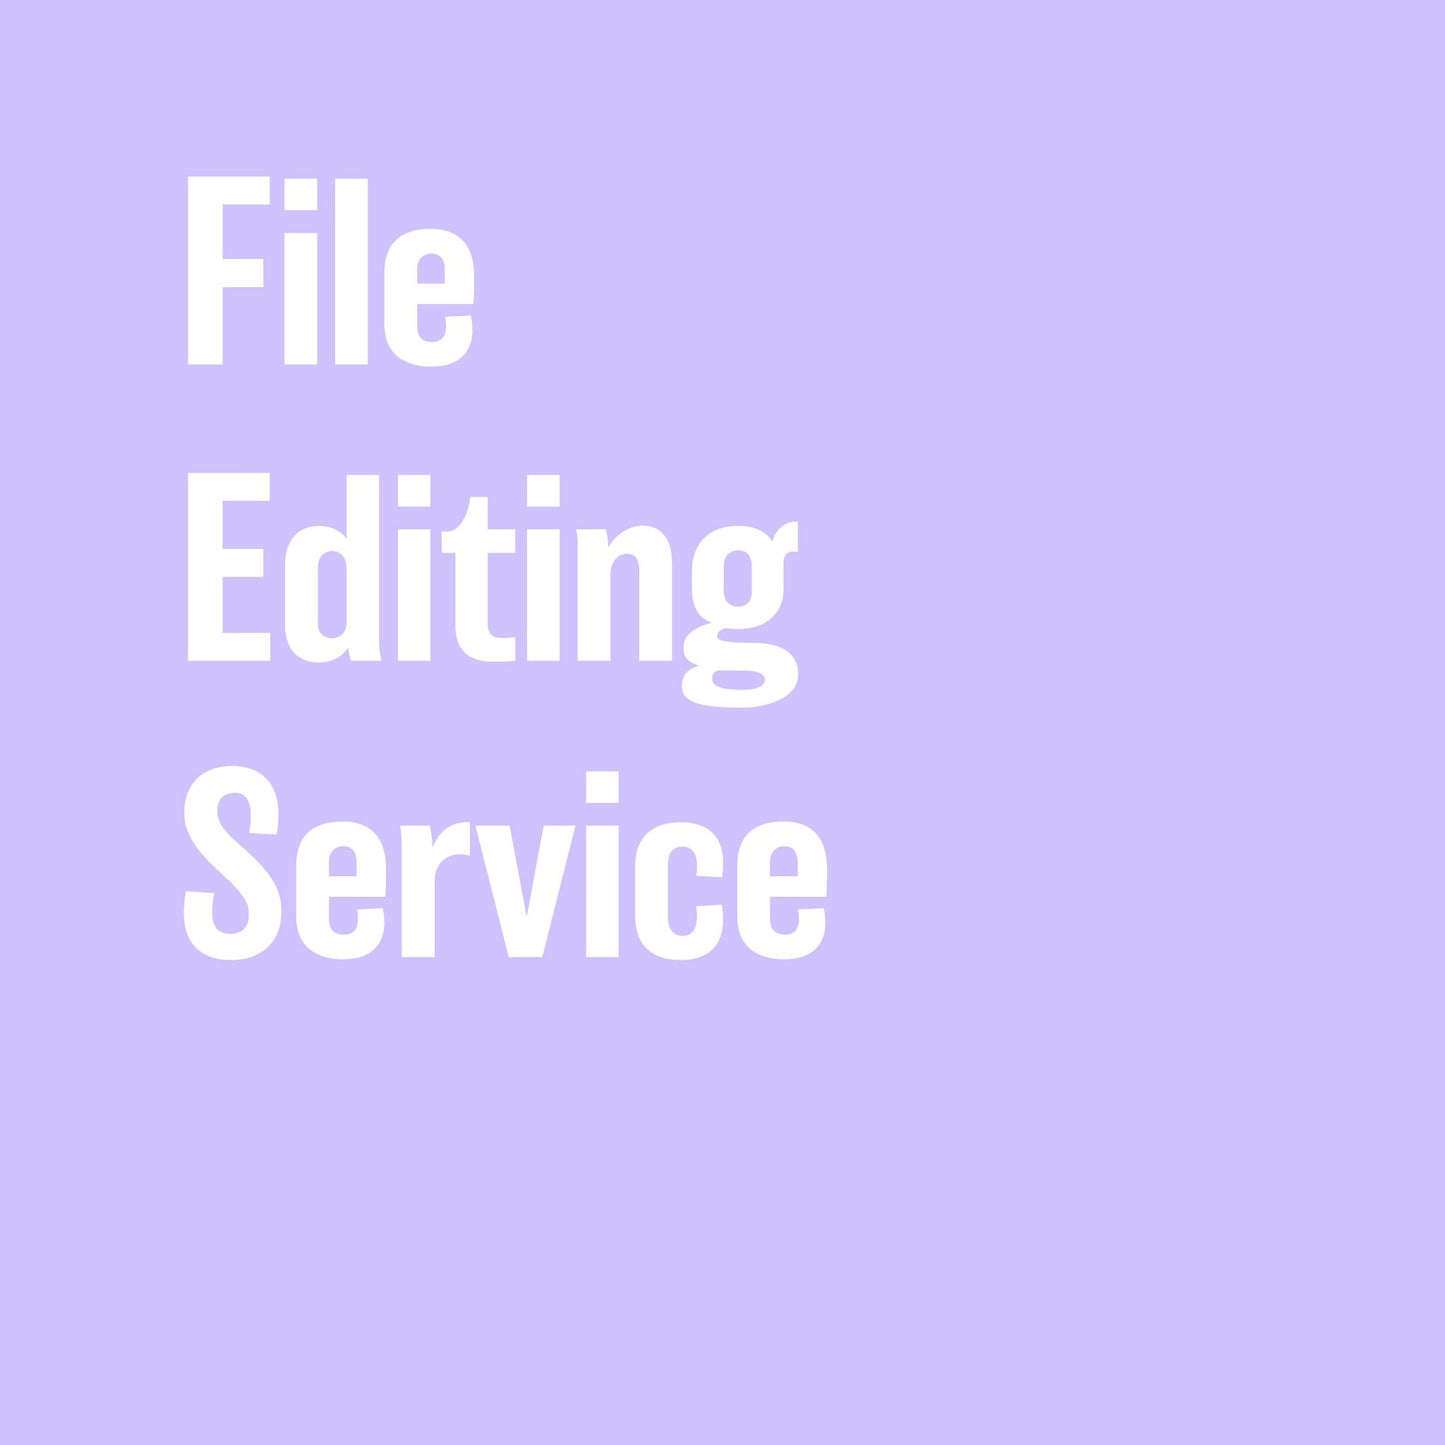 File Editing Service - By the Hour - by K. A. Artist Shop - K. A. Artist Shop